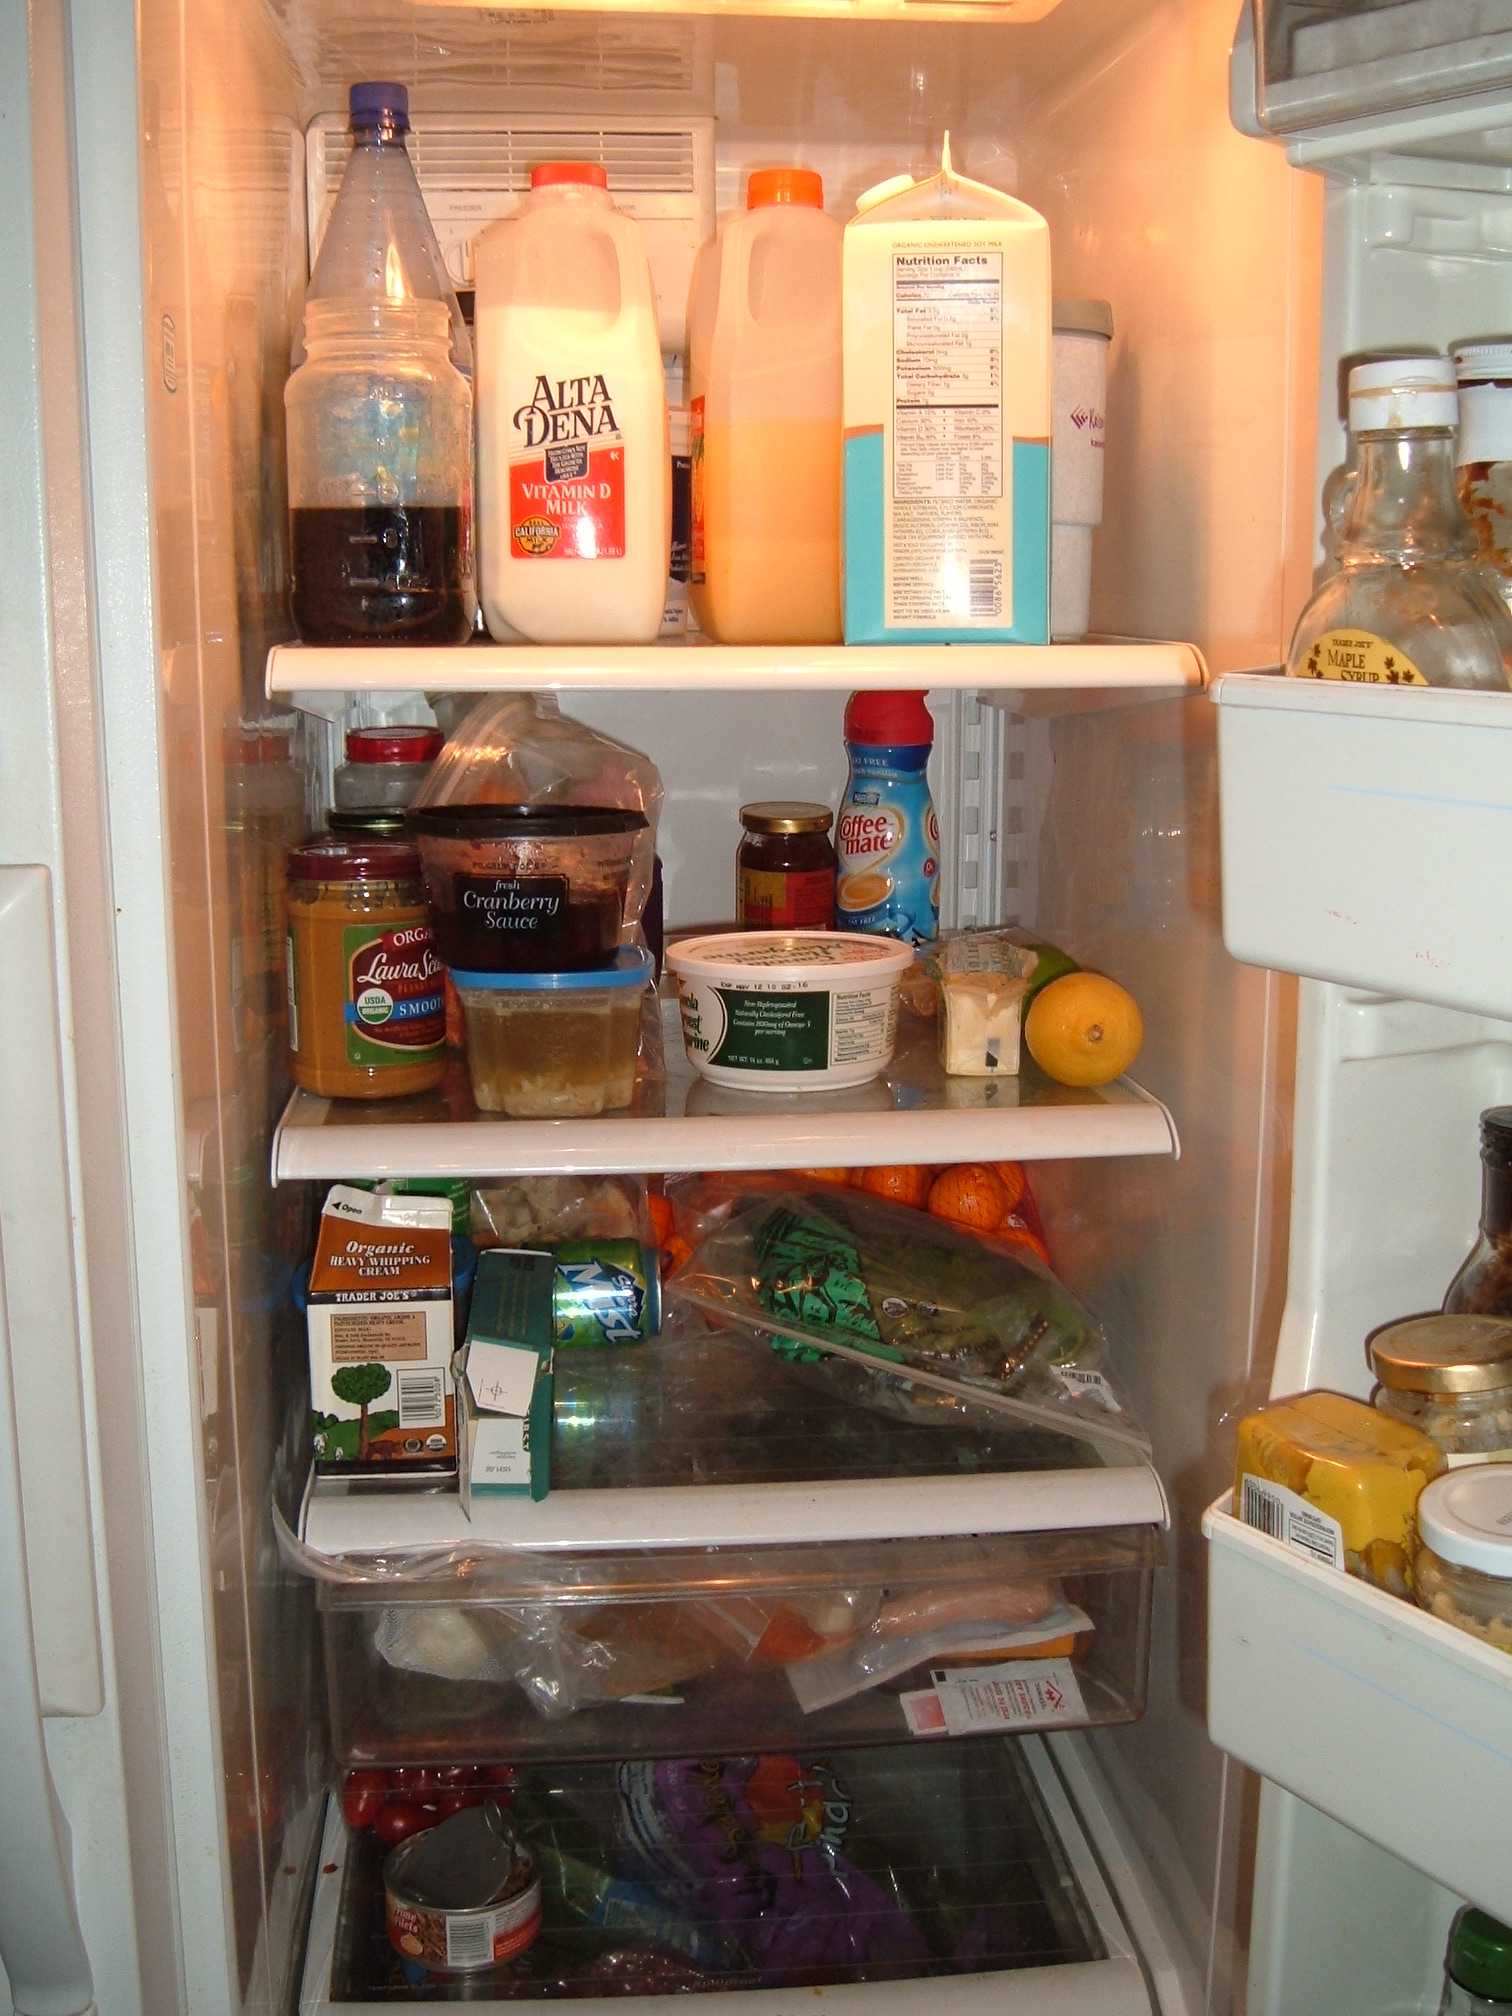 the open refrigerator is filled with all kinds of food